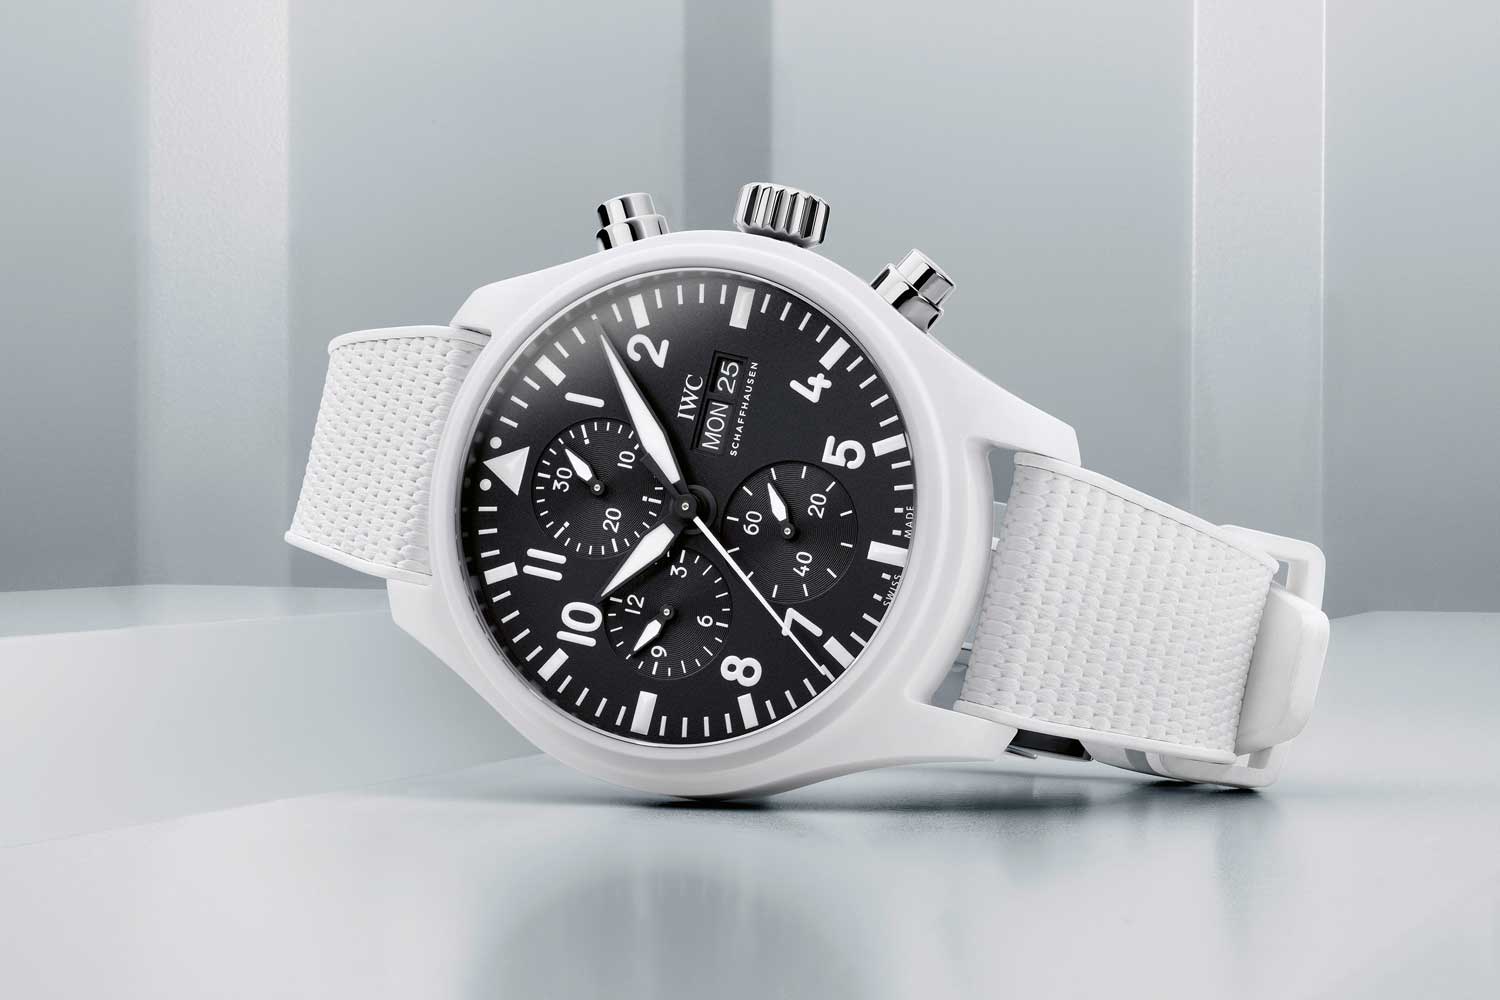 IWC Pilot’s Watch Chronograph TOP GUN Edition in “IWC Lake Tahoe” white takes inspiration from the lake's picturesque winter landscape